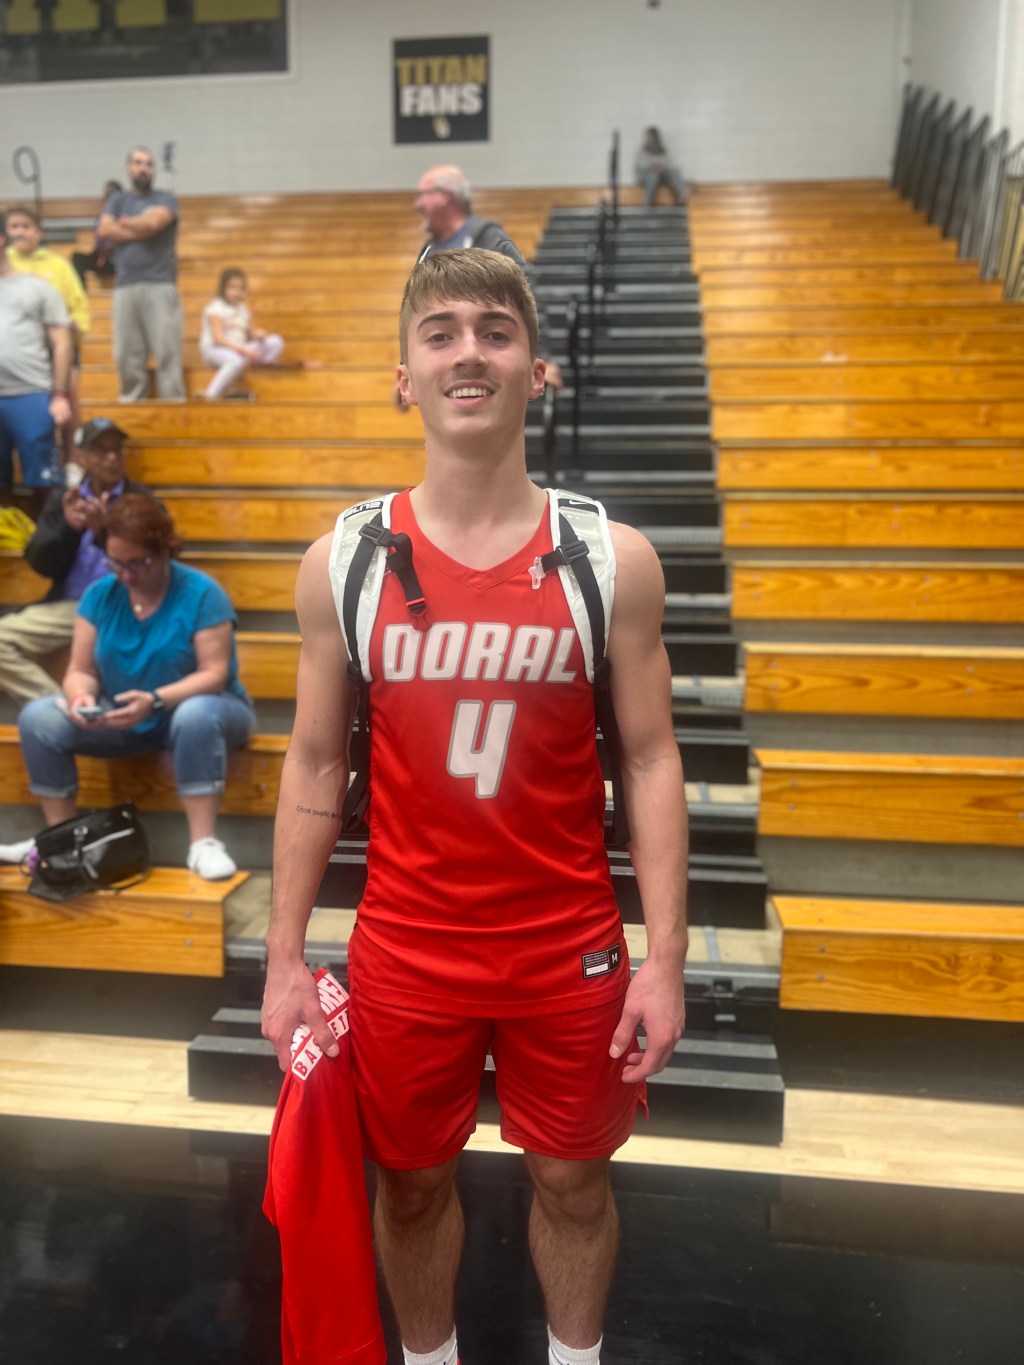 Kelleher Law Holiday Hoopfest: Day 1 Top Performers